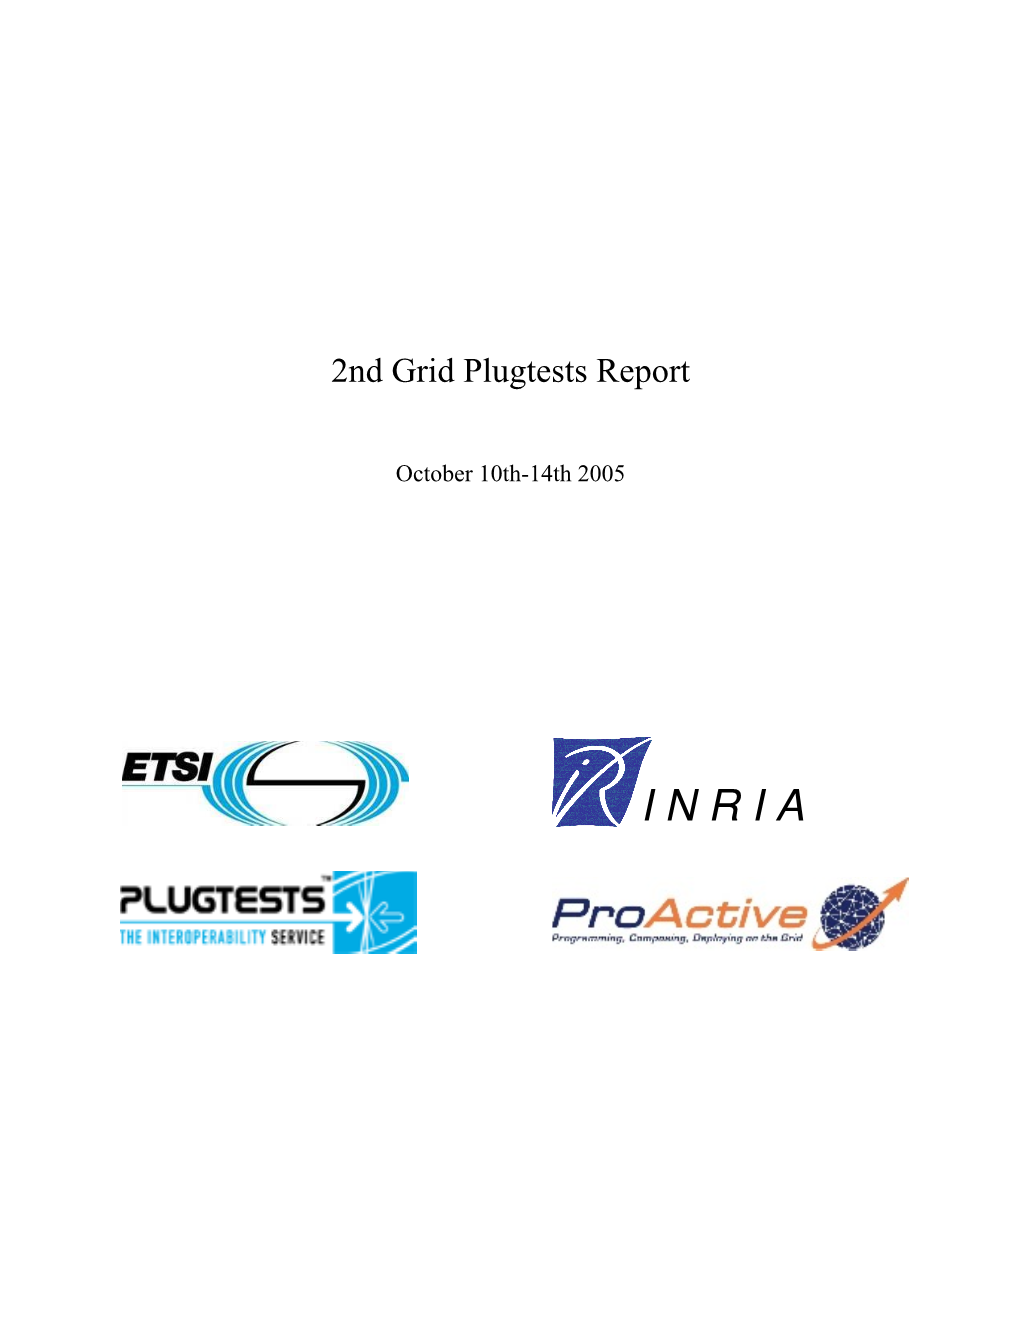 2Nd Grid Plugtests Report